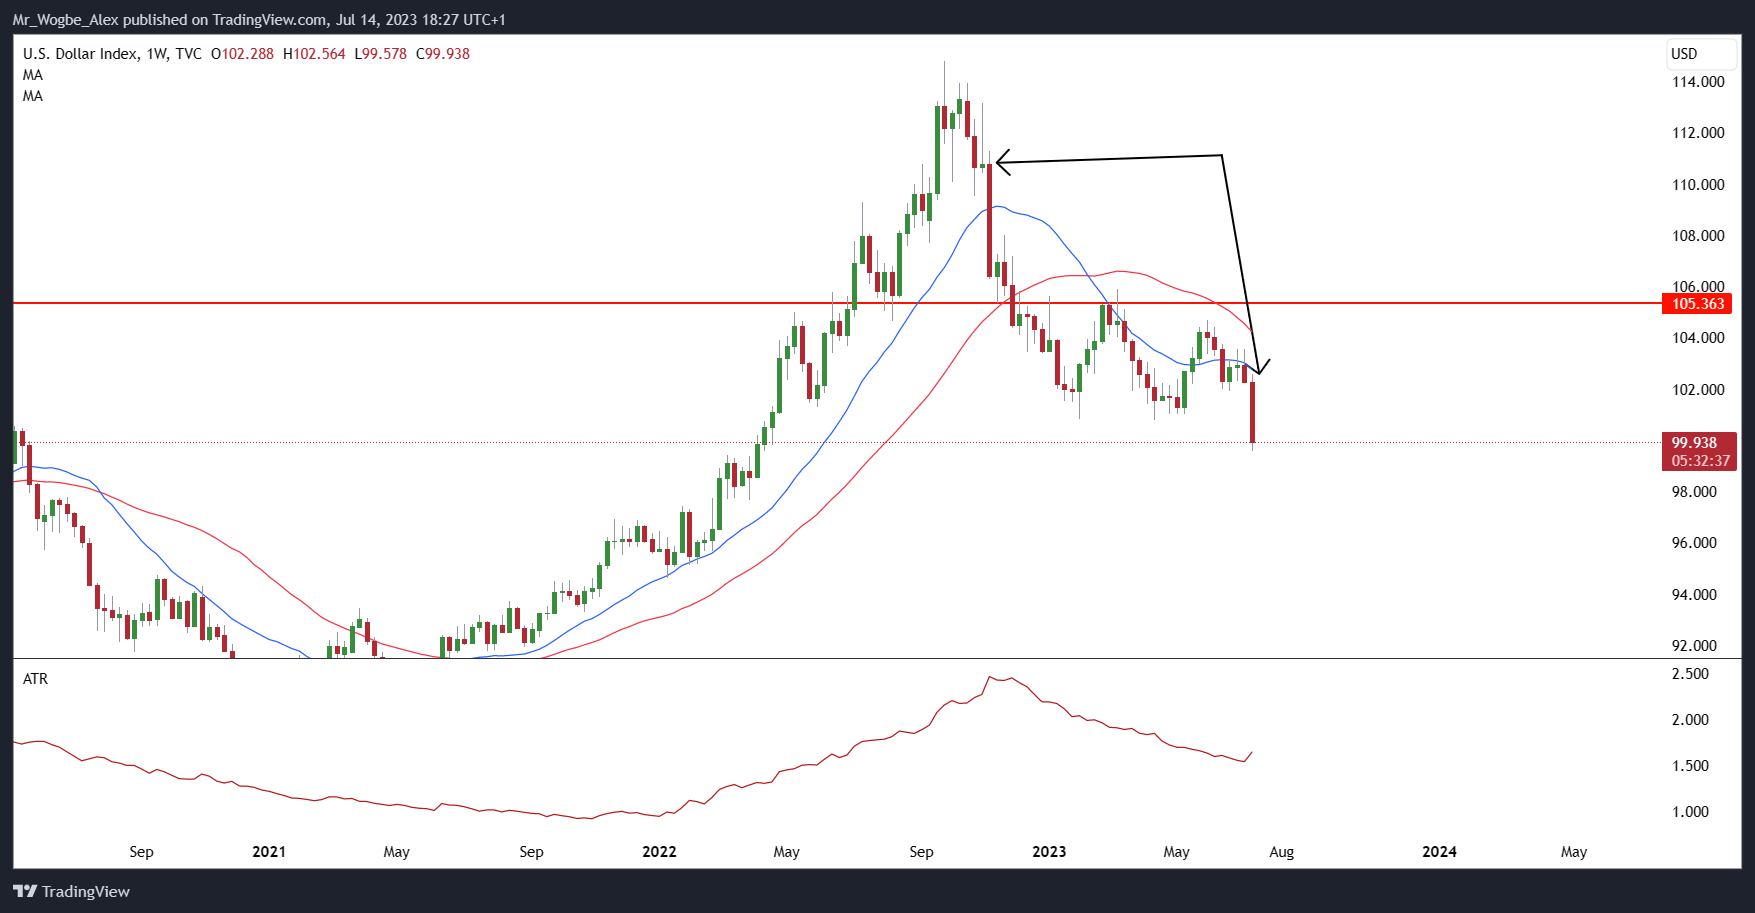 DXY weekly chart from TradingView